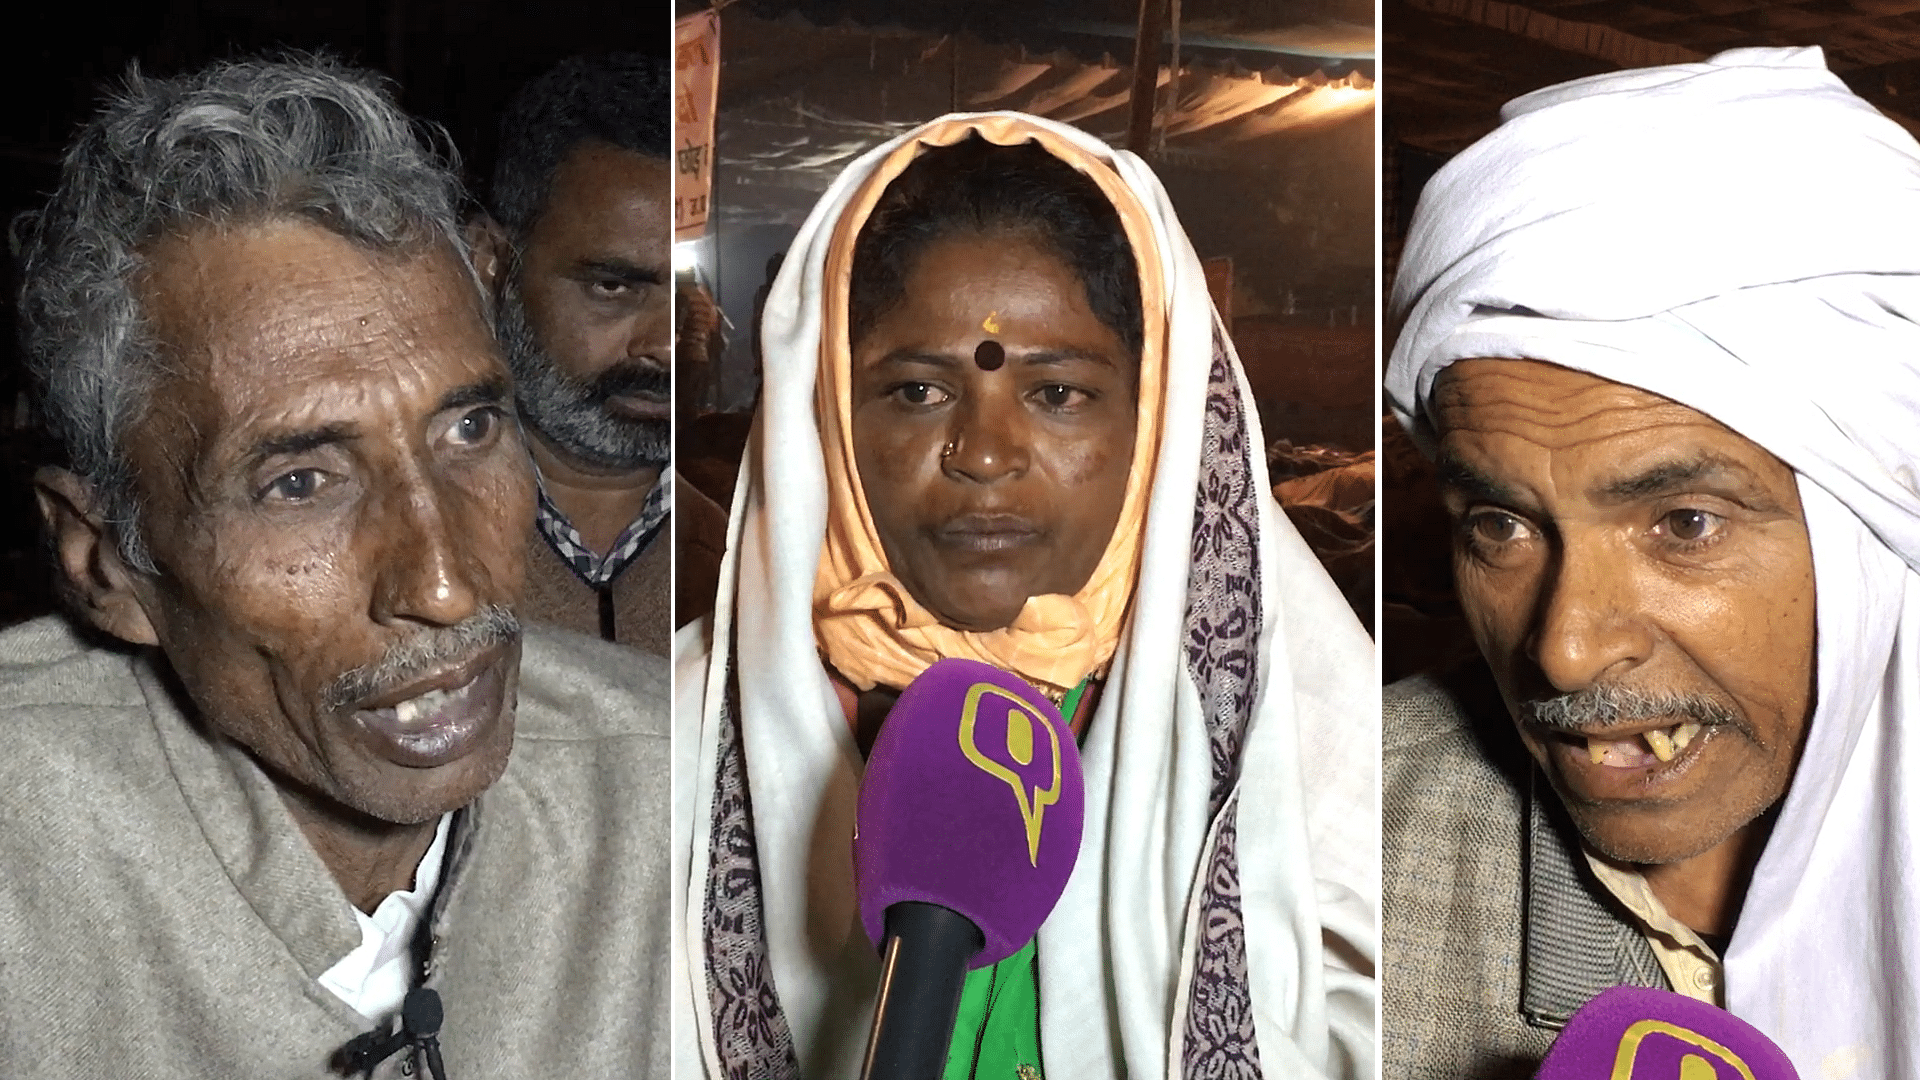 At the Kisan Mukti March, The Quint speaks to distressed farmers, who speak about their struggles like farm loans, infrastructural crisis, low crop rates and oppression by Thakurs.